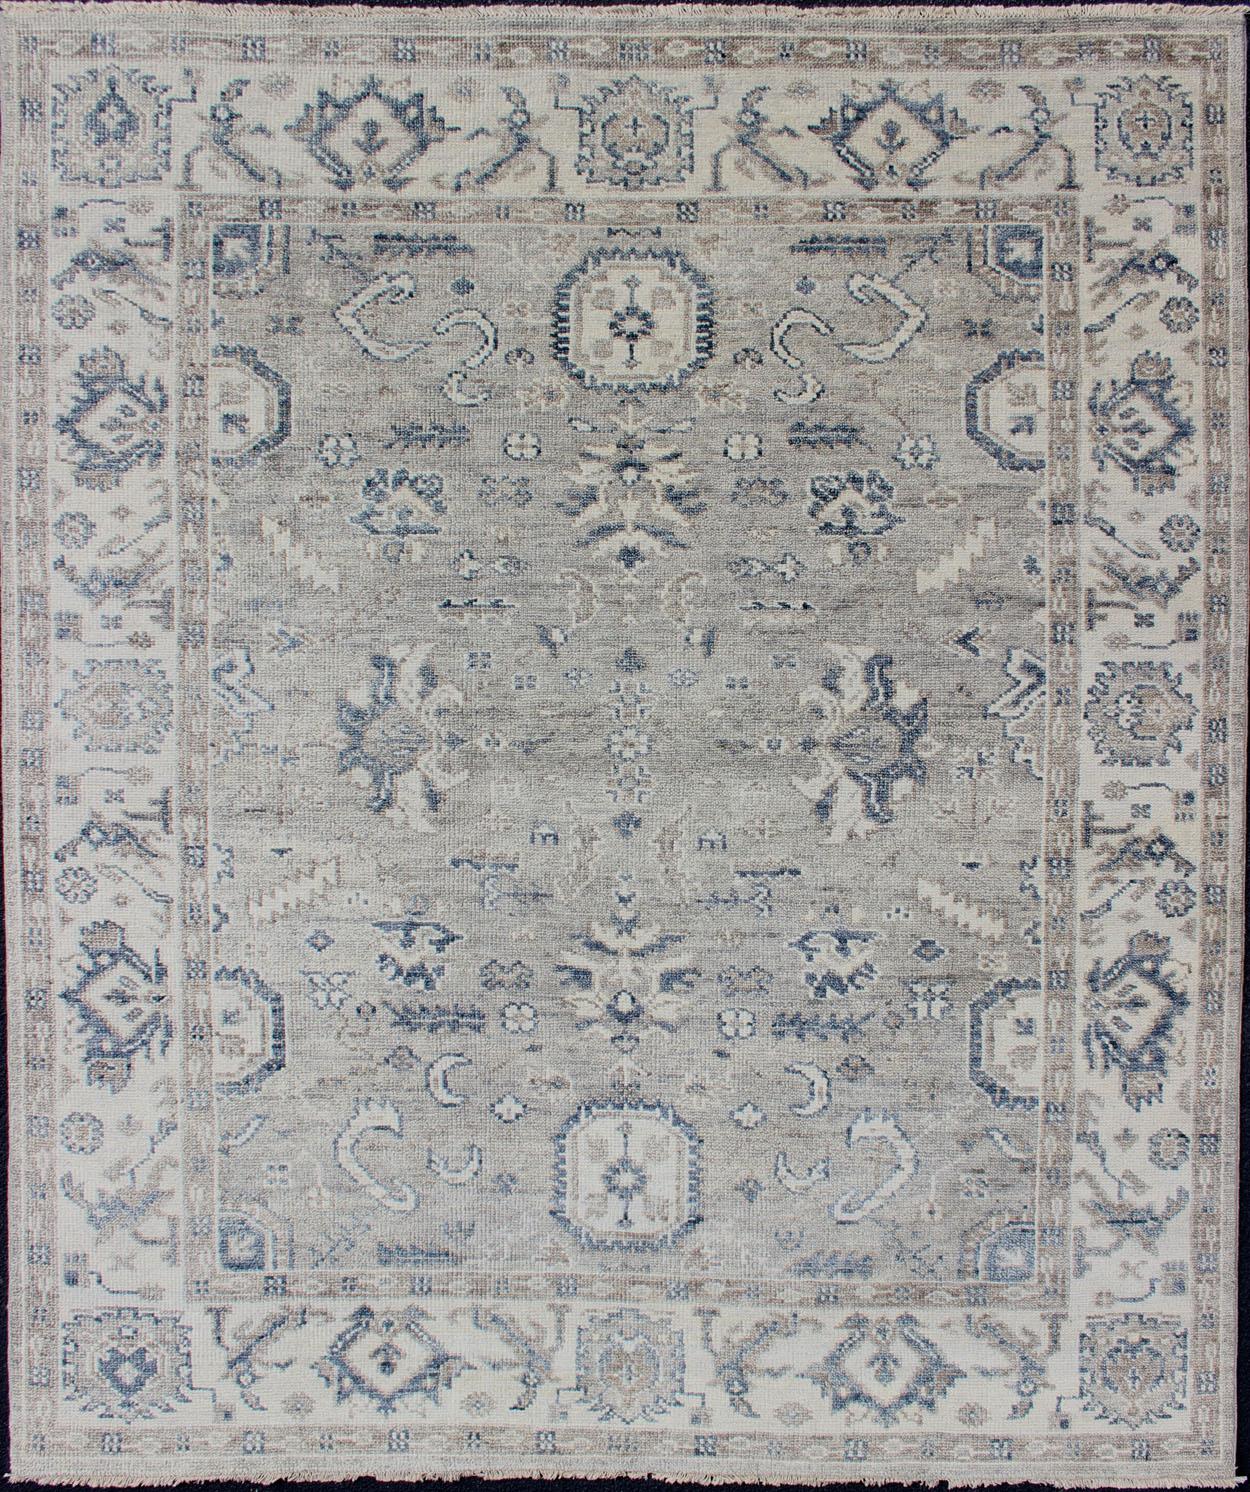 Hand-Knotted Indian Wool Oushak Rug in Cool Neutral Tones